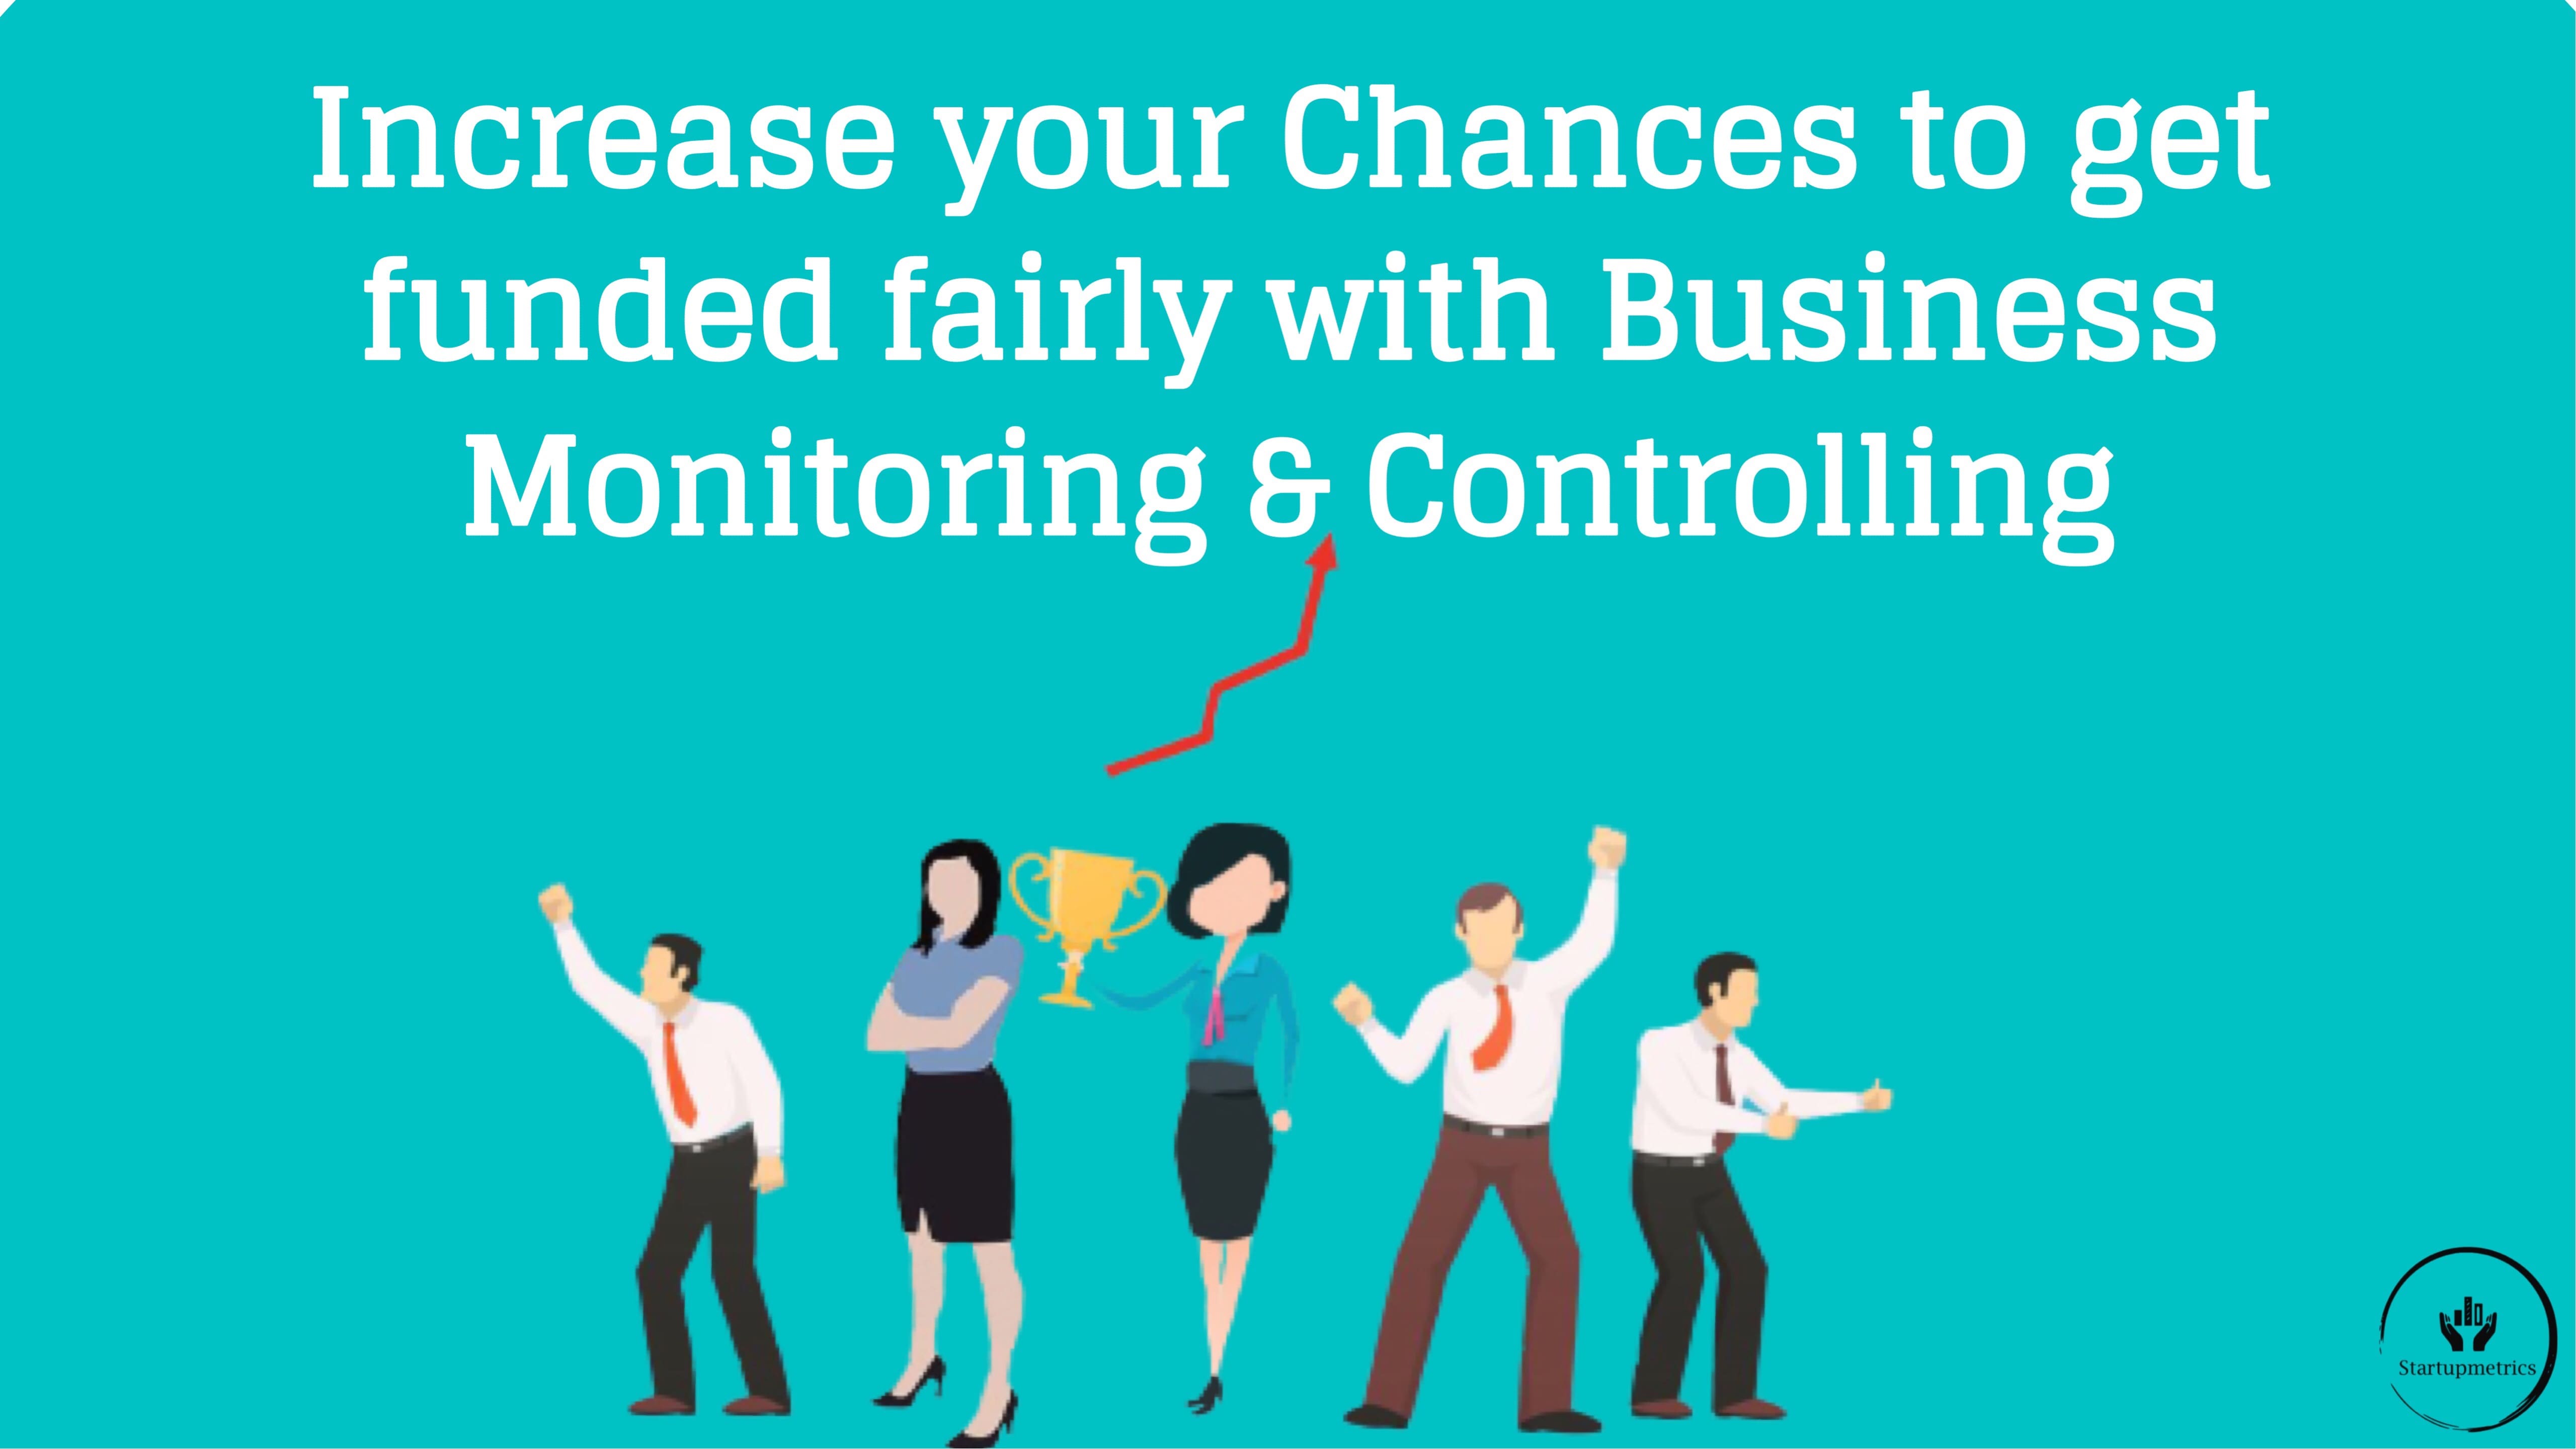 How can Business Activity Monitoring and Controlling help you to get funded fairly?